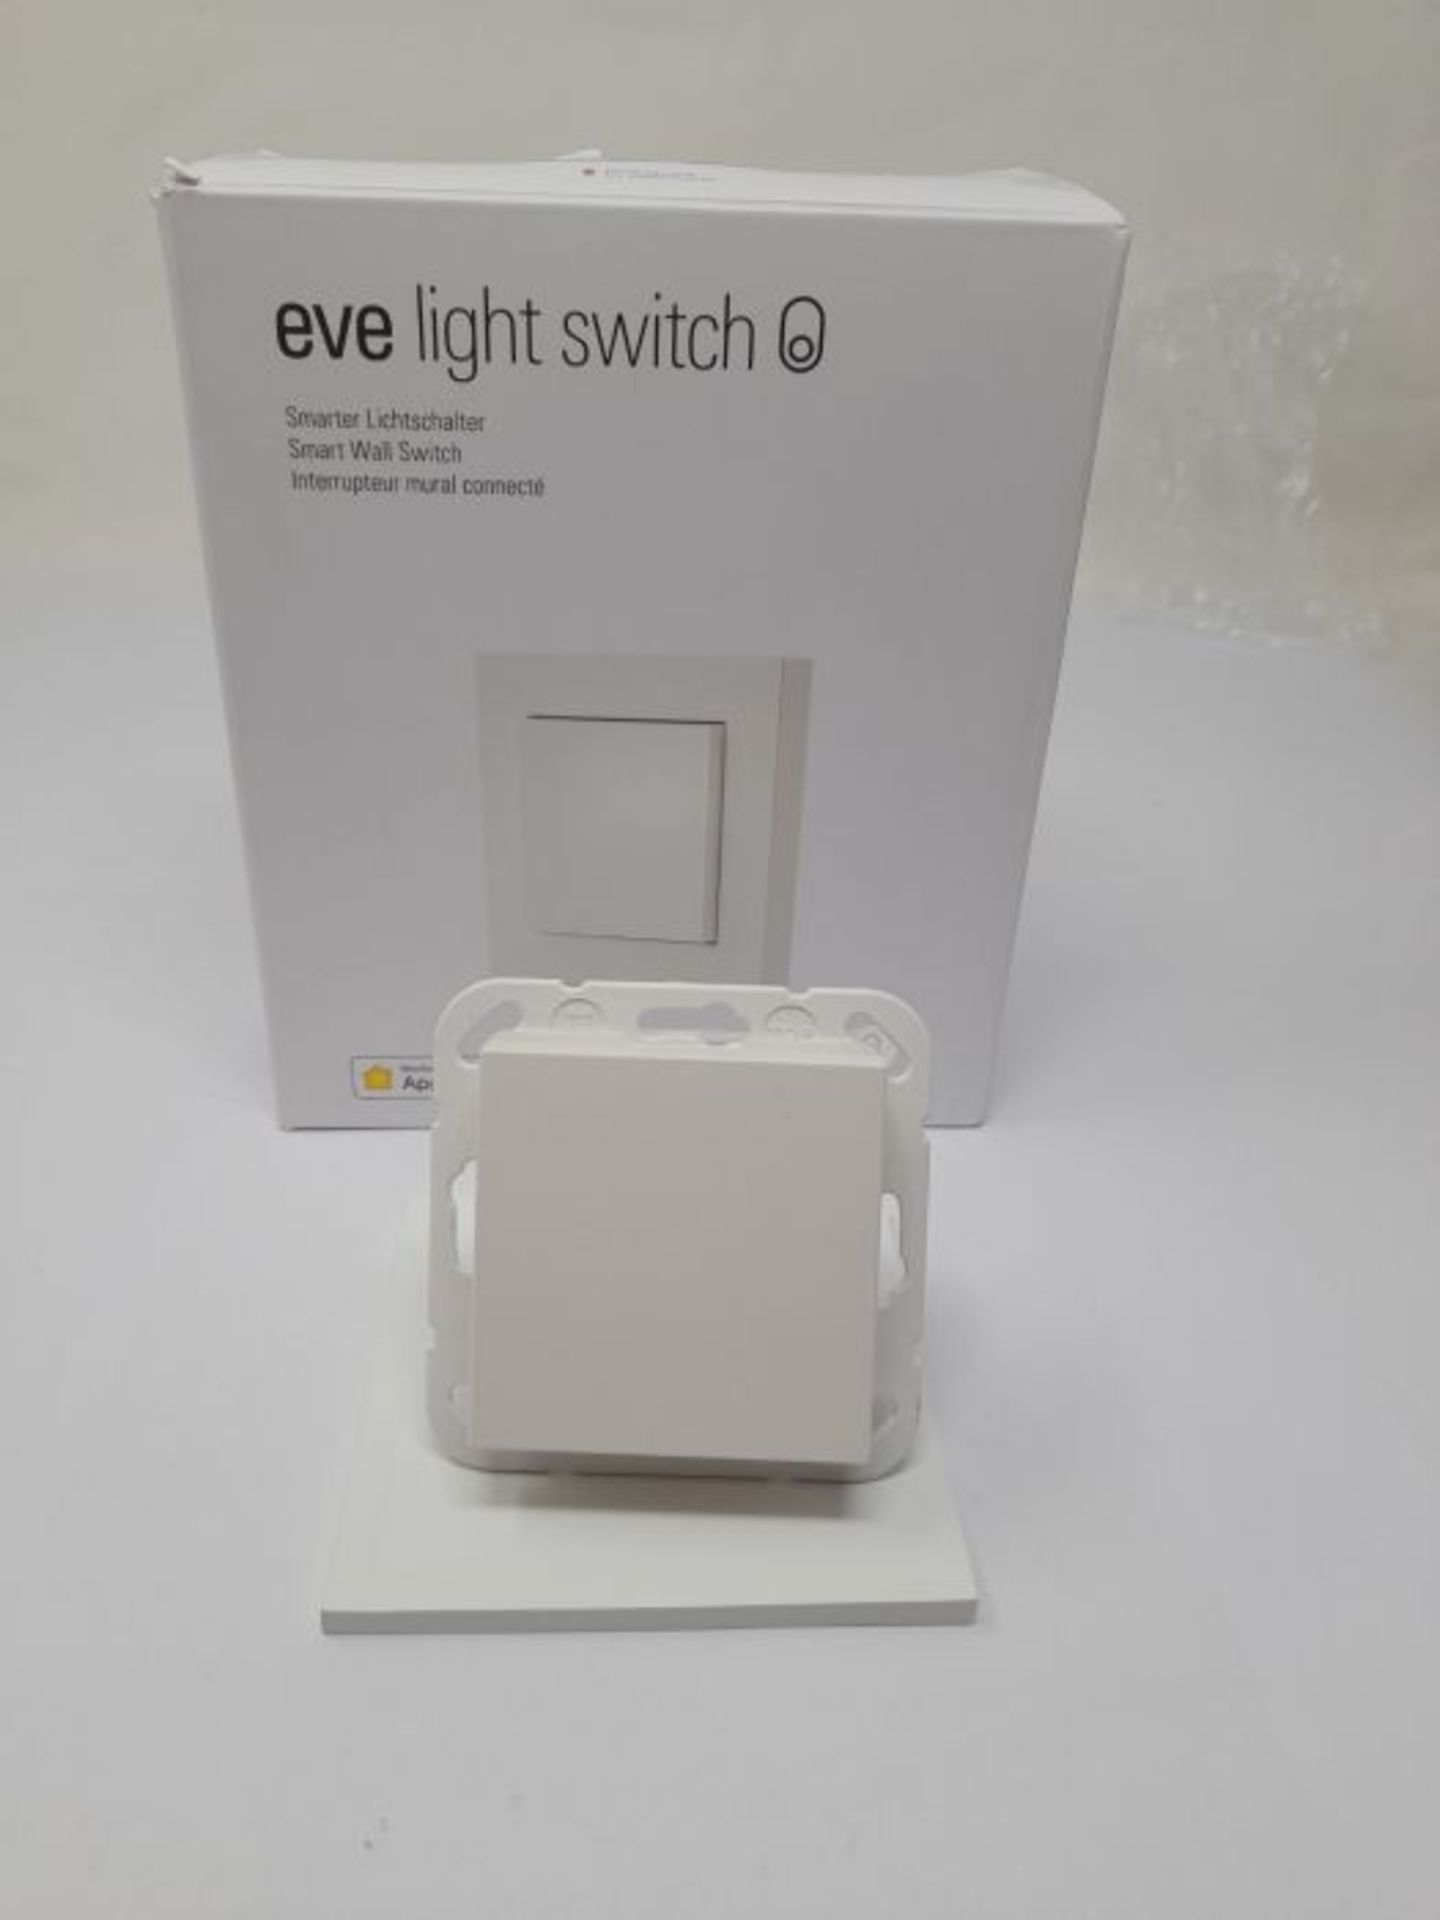 RRP £94.00 [INCOMPLETE] Eve Light Switch â¬  Smarter Lichtschalter (Apple HomeKit), Einfach- - Image 3 of 3